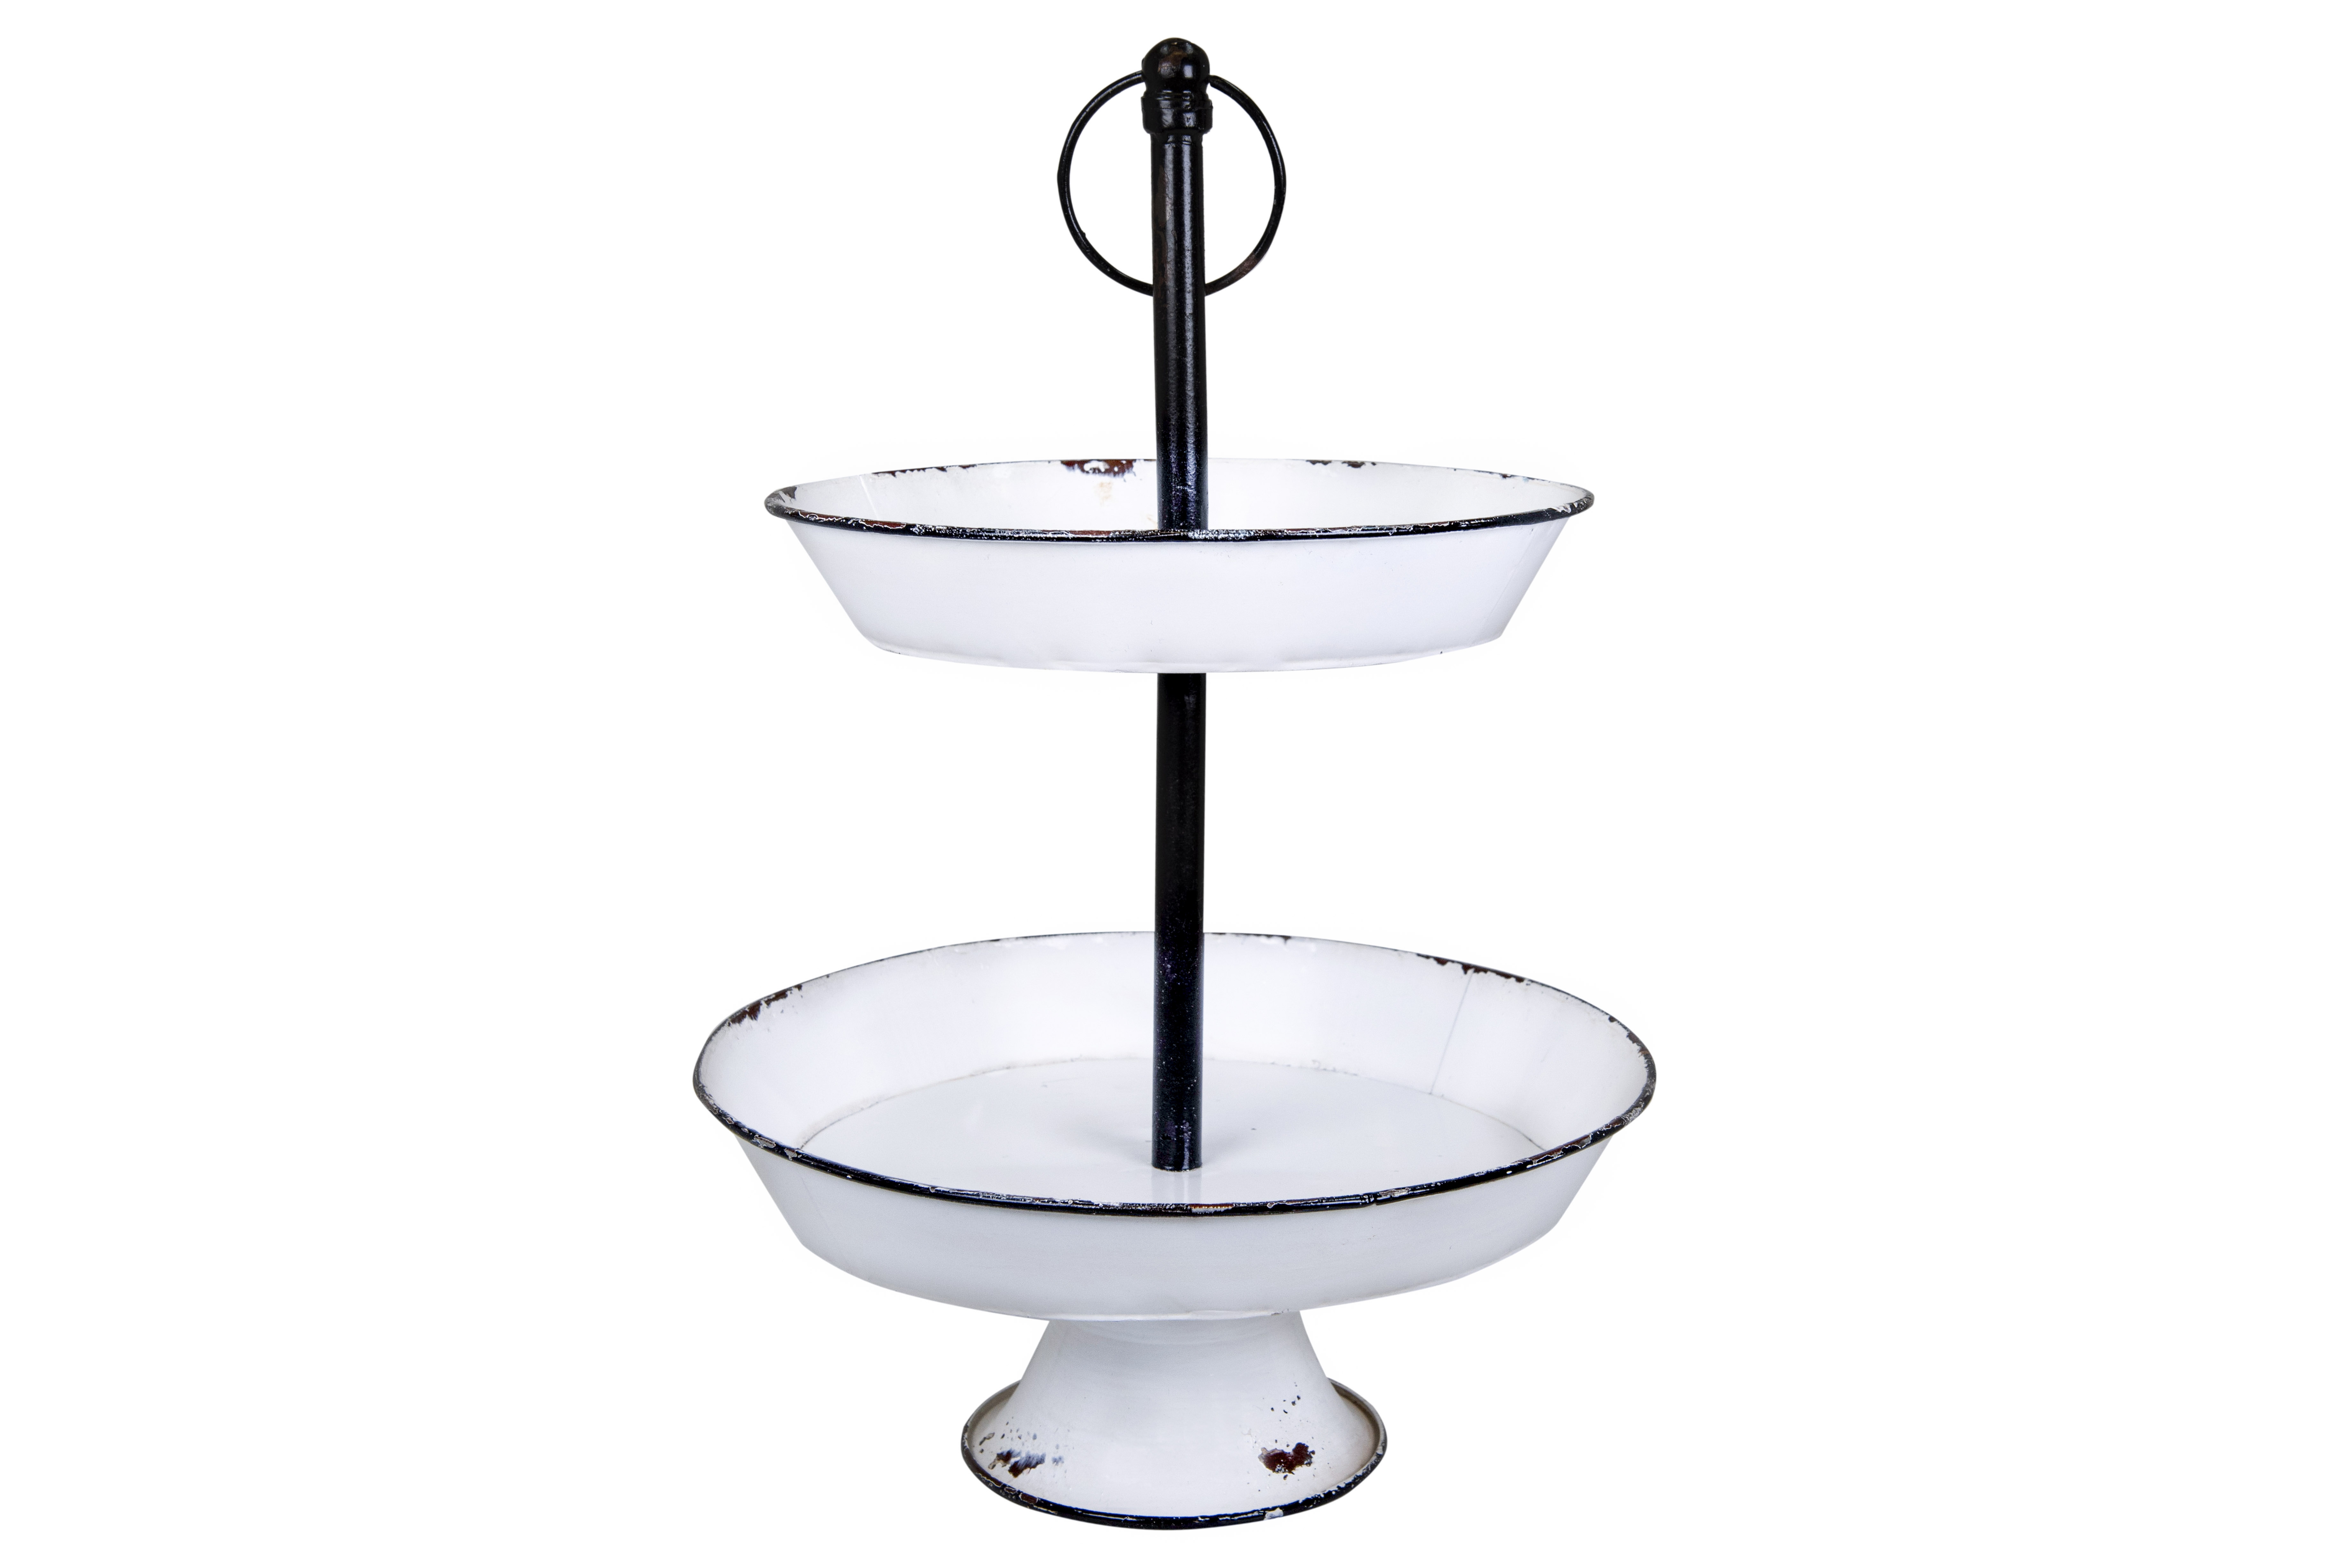 Decorative 2-Tier Enameled Metal Tray with Distressed Finish & Handle - Nomad Home